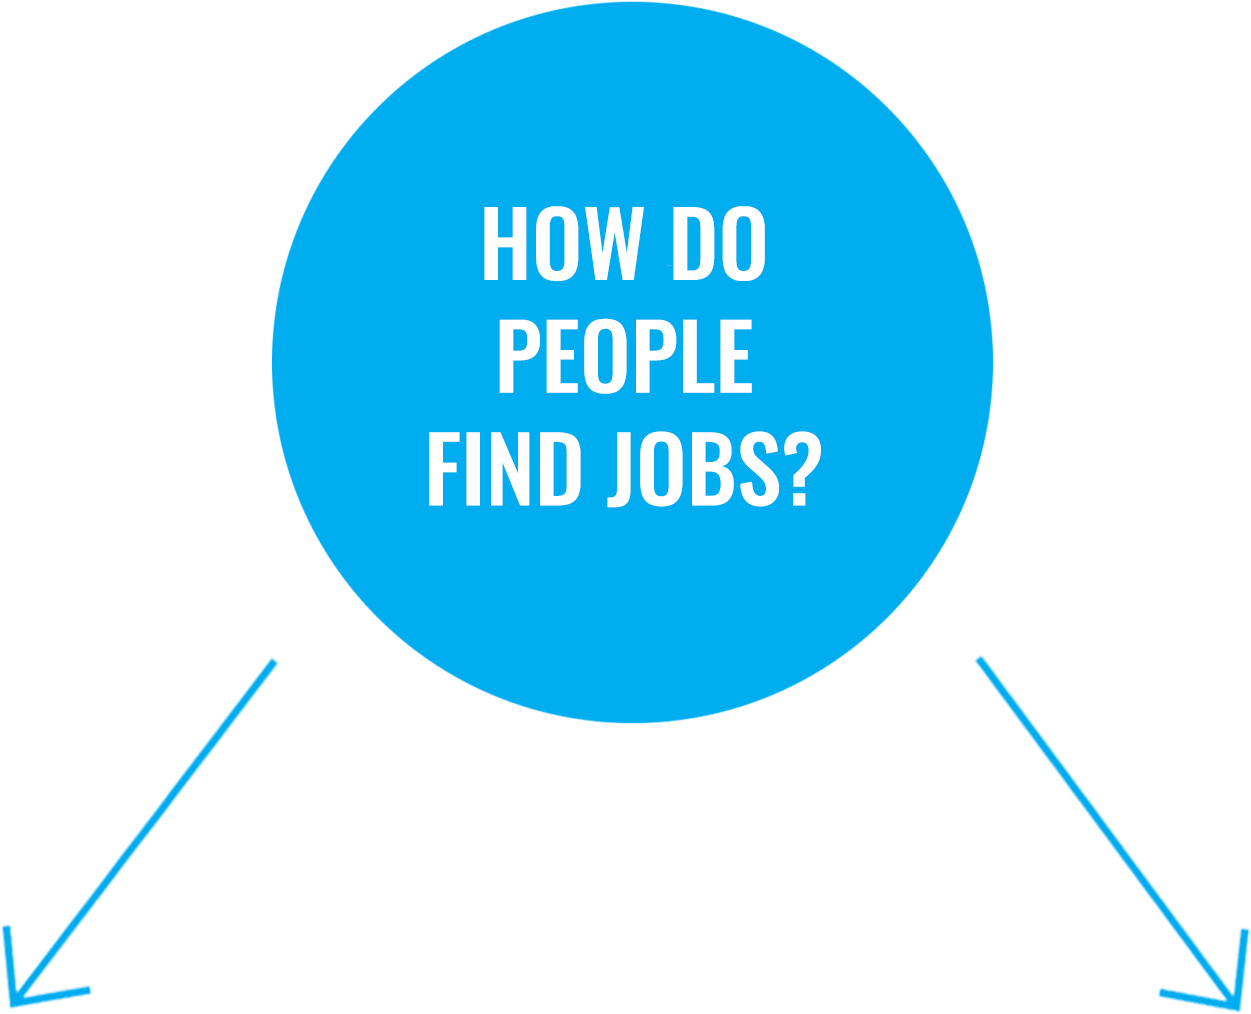 Question 1: How do people find jobs?